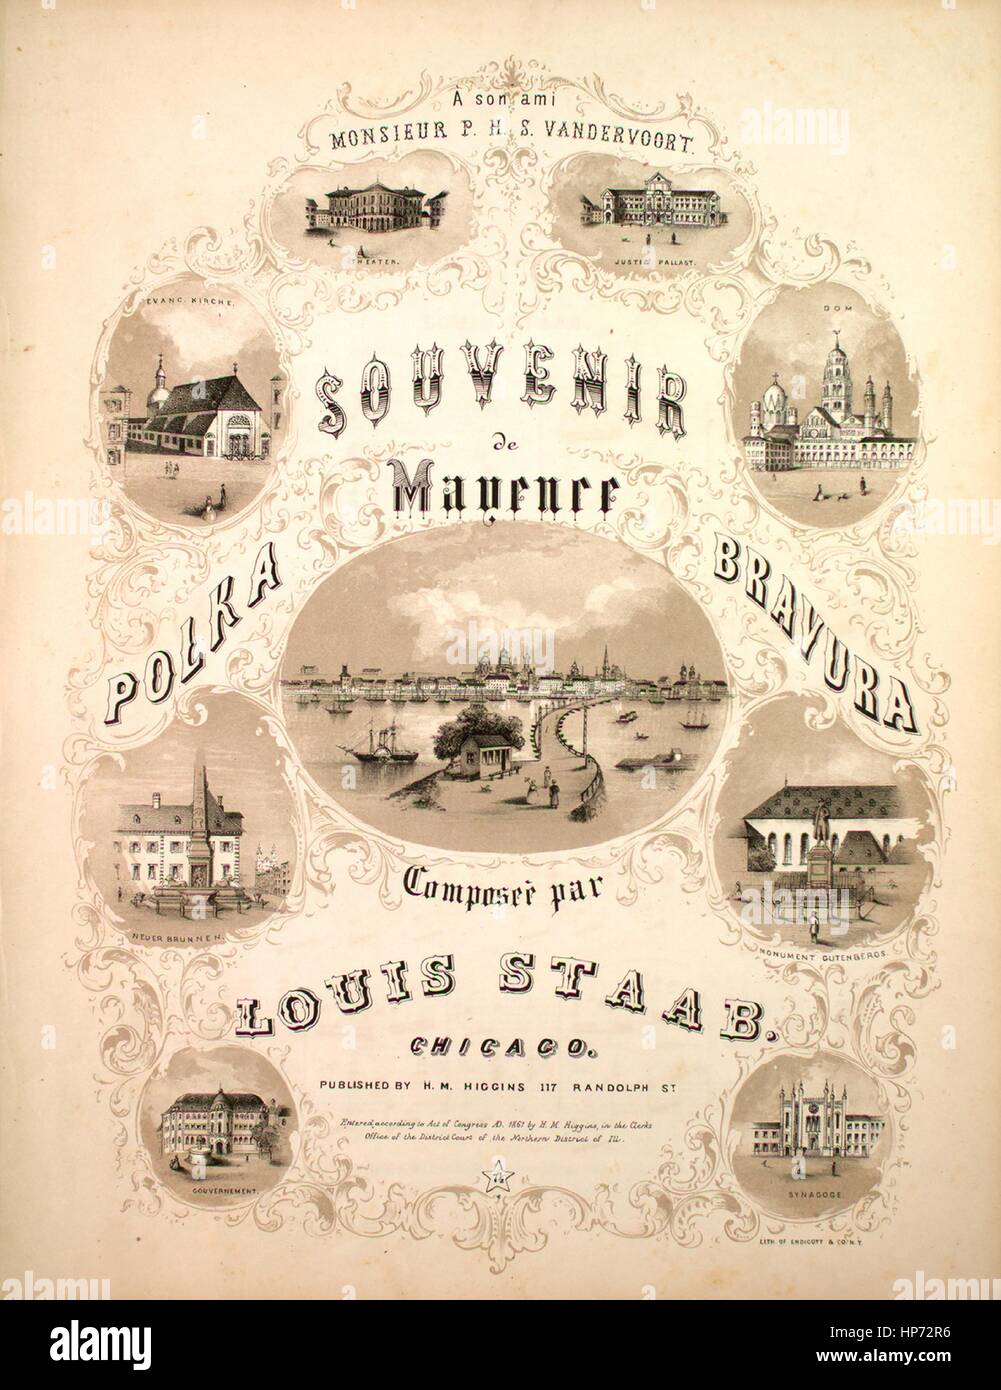 Sheet music cover image of the song 'Souvenir de Mayence Polka Bravura', with original authorship notes reading 'Composee par Louis Staab', United States, 1861. The publisher is listed as 'H.M. Higgins, 117 Randolph St.', the form of composition is 'sectional', the instrumentation is 'piano', the first line reads 'None', and the illustration artist is listed as 'Lith. of Endicott and Co. N.Y.; S. Pearson Eng'r Chicago, Ill.'. Stock Photo